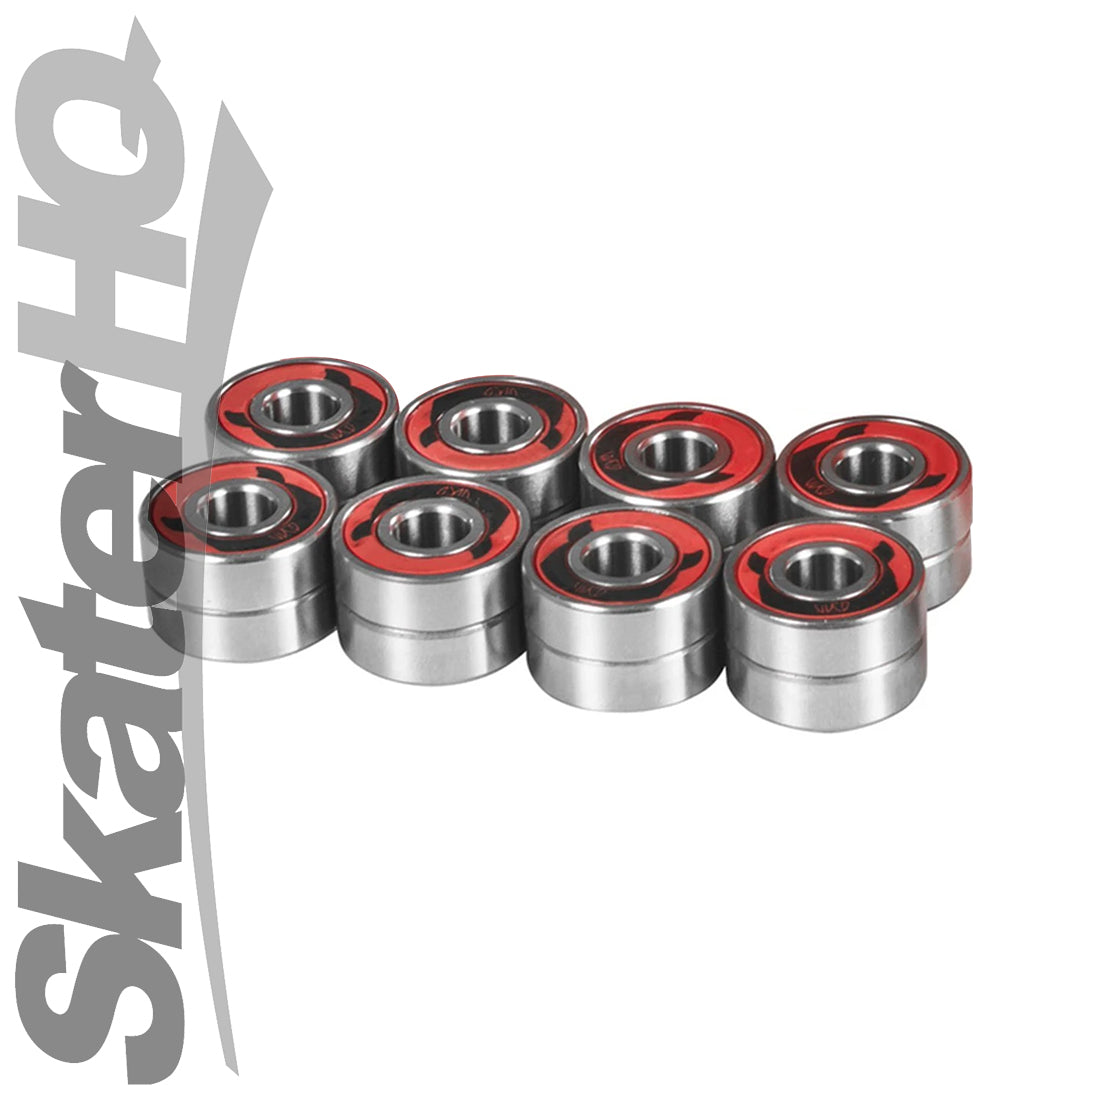 Wicked Twincam ILQ-9 Pro Bearings 16pk Inline and Quad Bearings